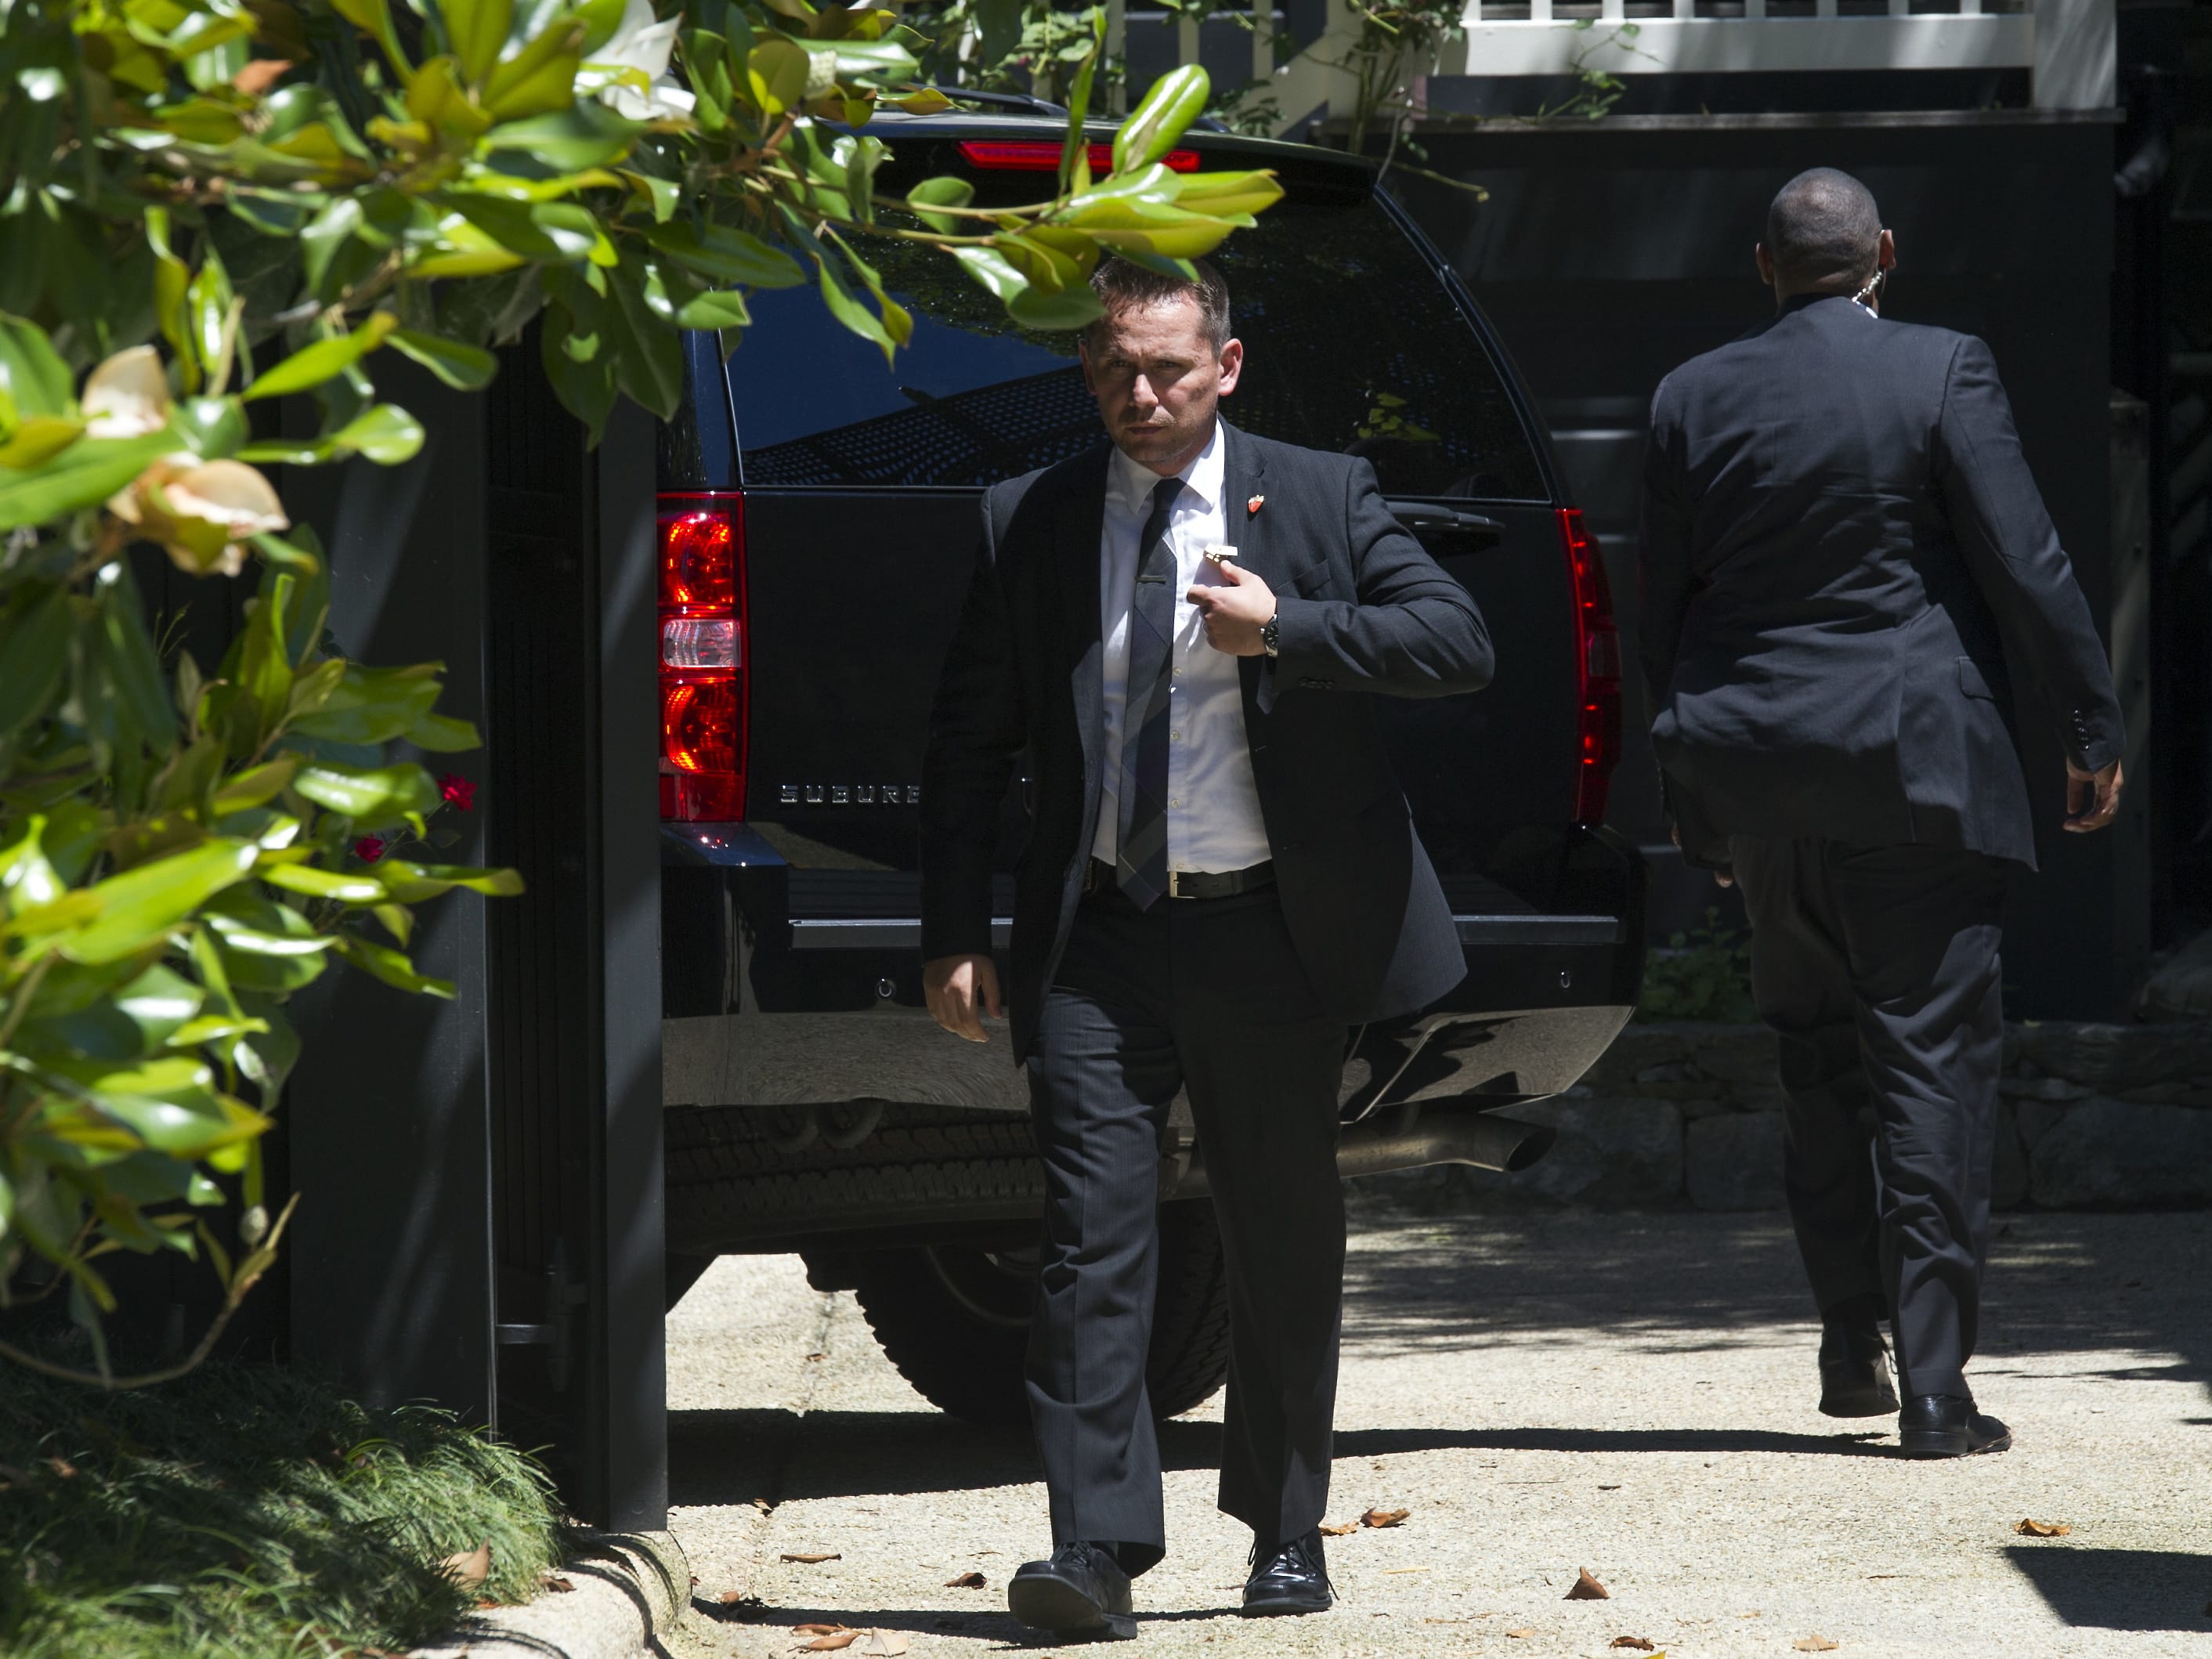 Secret Service stand guard around a Secret Service vehicle after it arrived at the home of Democratic presidential candidate Hillary Clinton in Washington, Saturday, July 2, 2016. The Clinton campaign says the FBI interviewed Clinton on Saturday morning in Washington, about her emails while she was secretary of state.